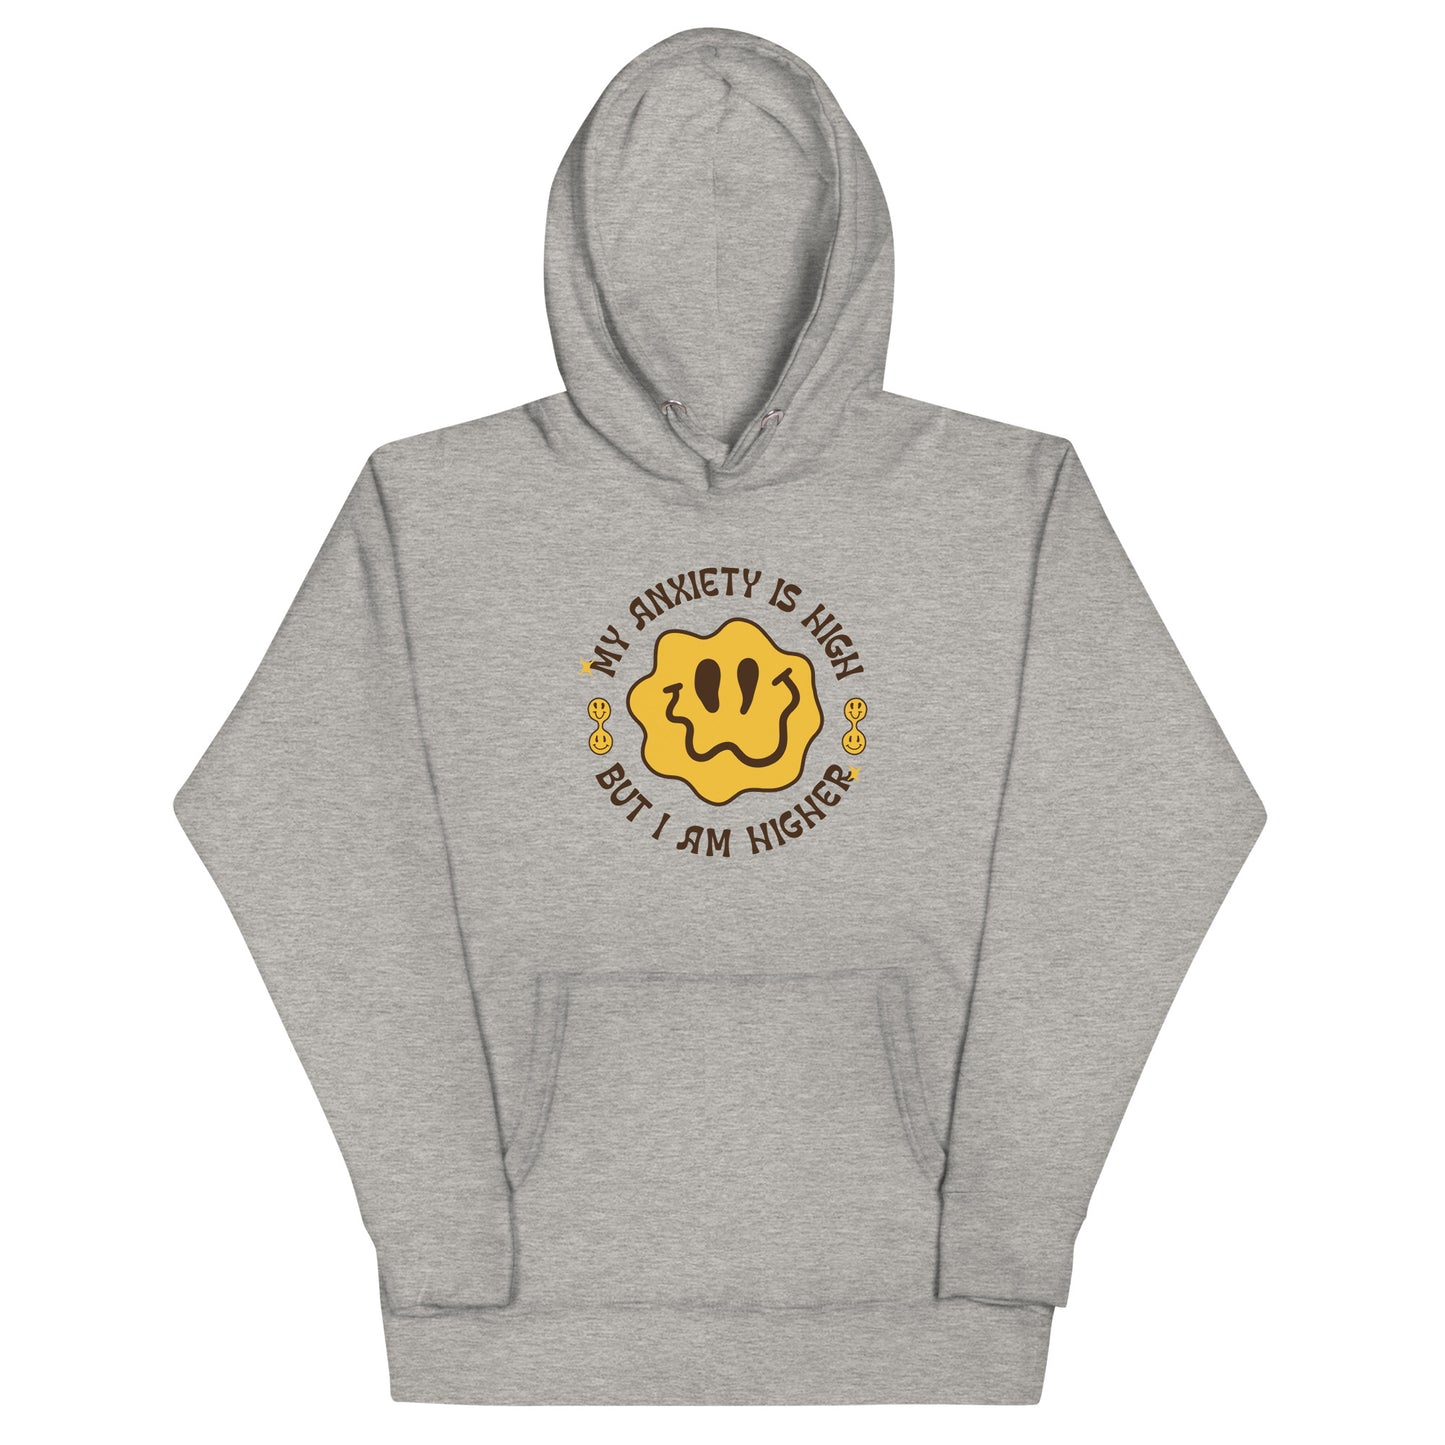 My Anxiety is High But I Am Higher Unisex Hoodie